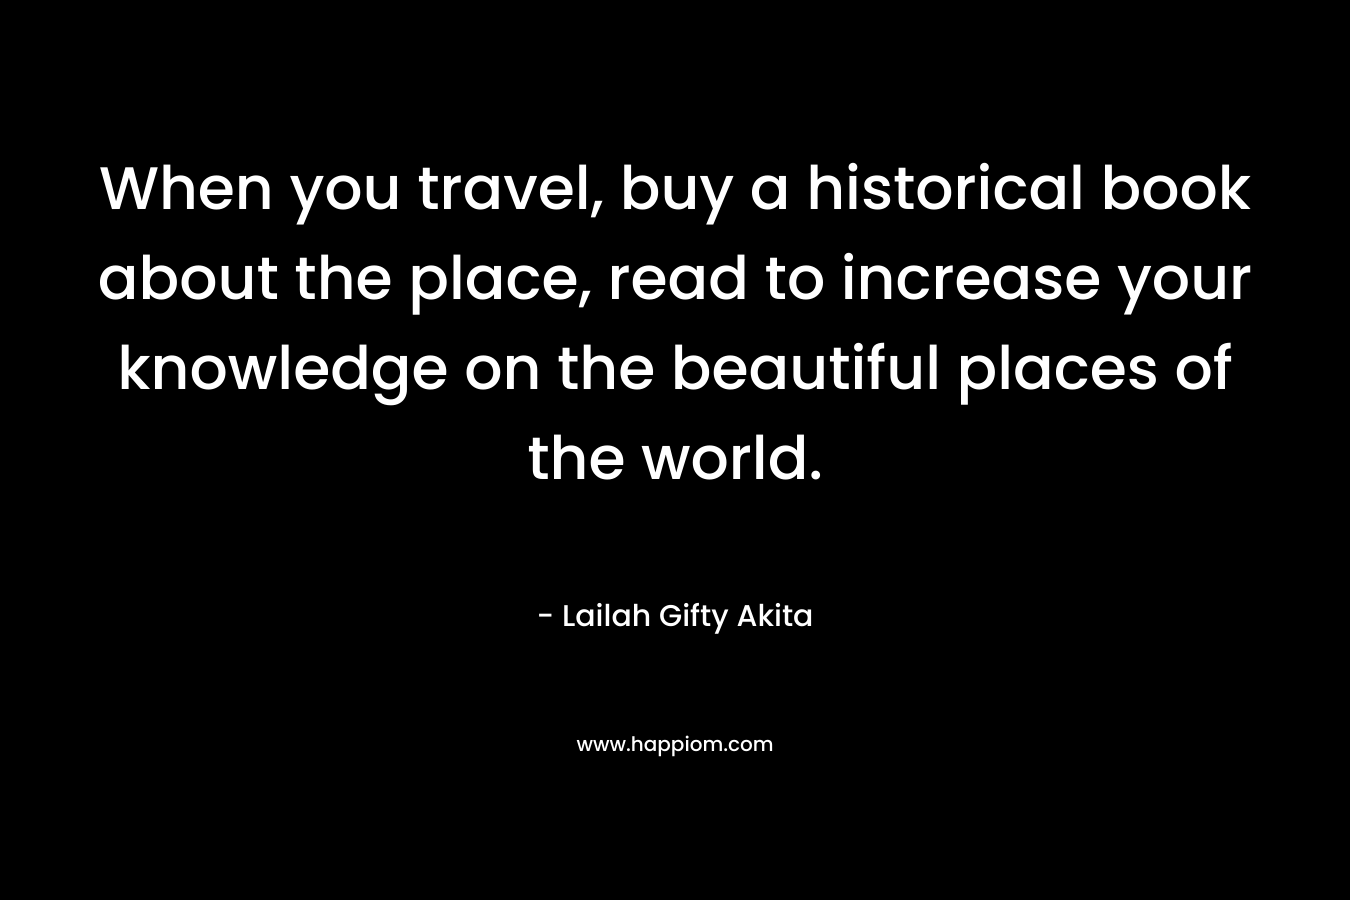 When you travel, buy a historical book about the place, read to increase your knowledge on the beautiful places of the world.